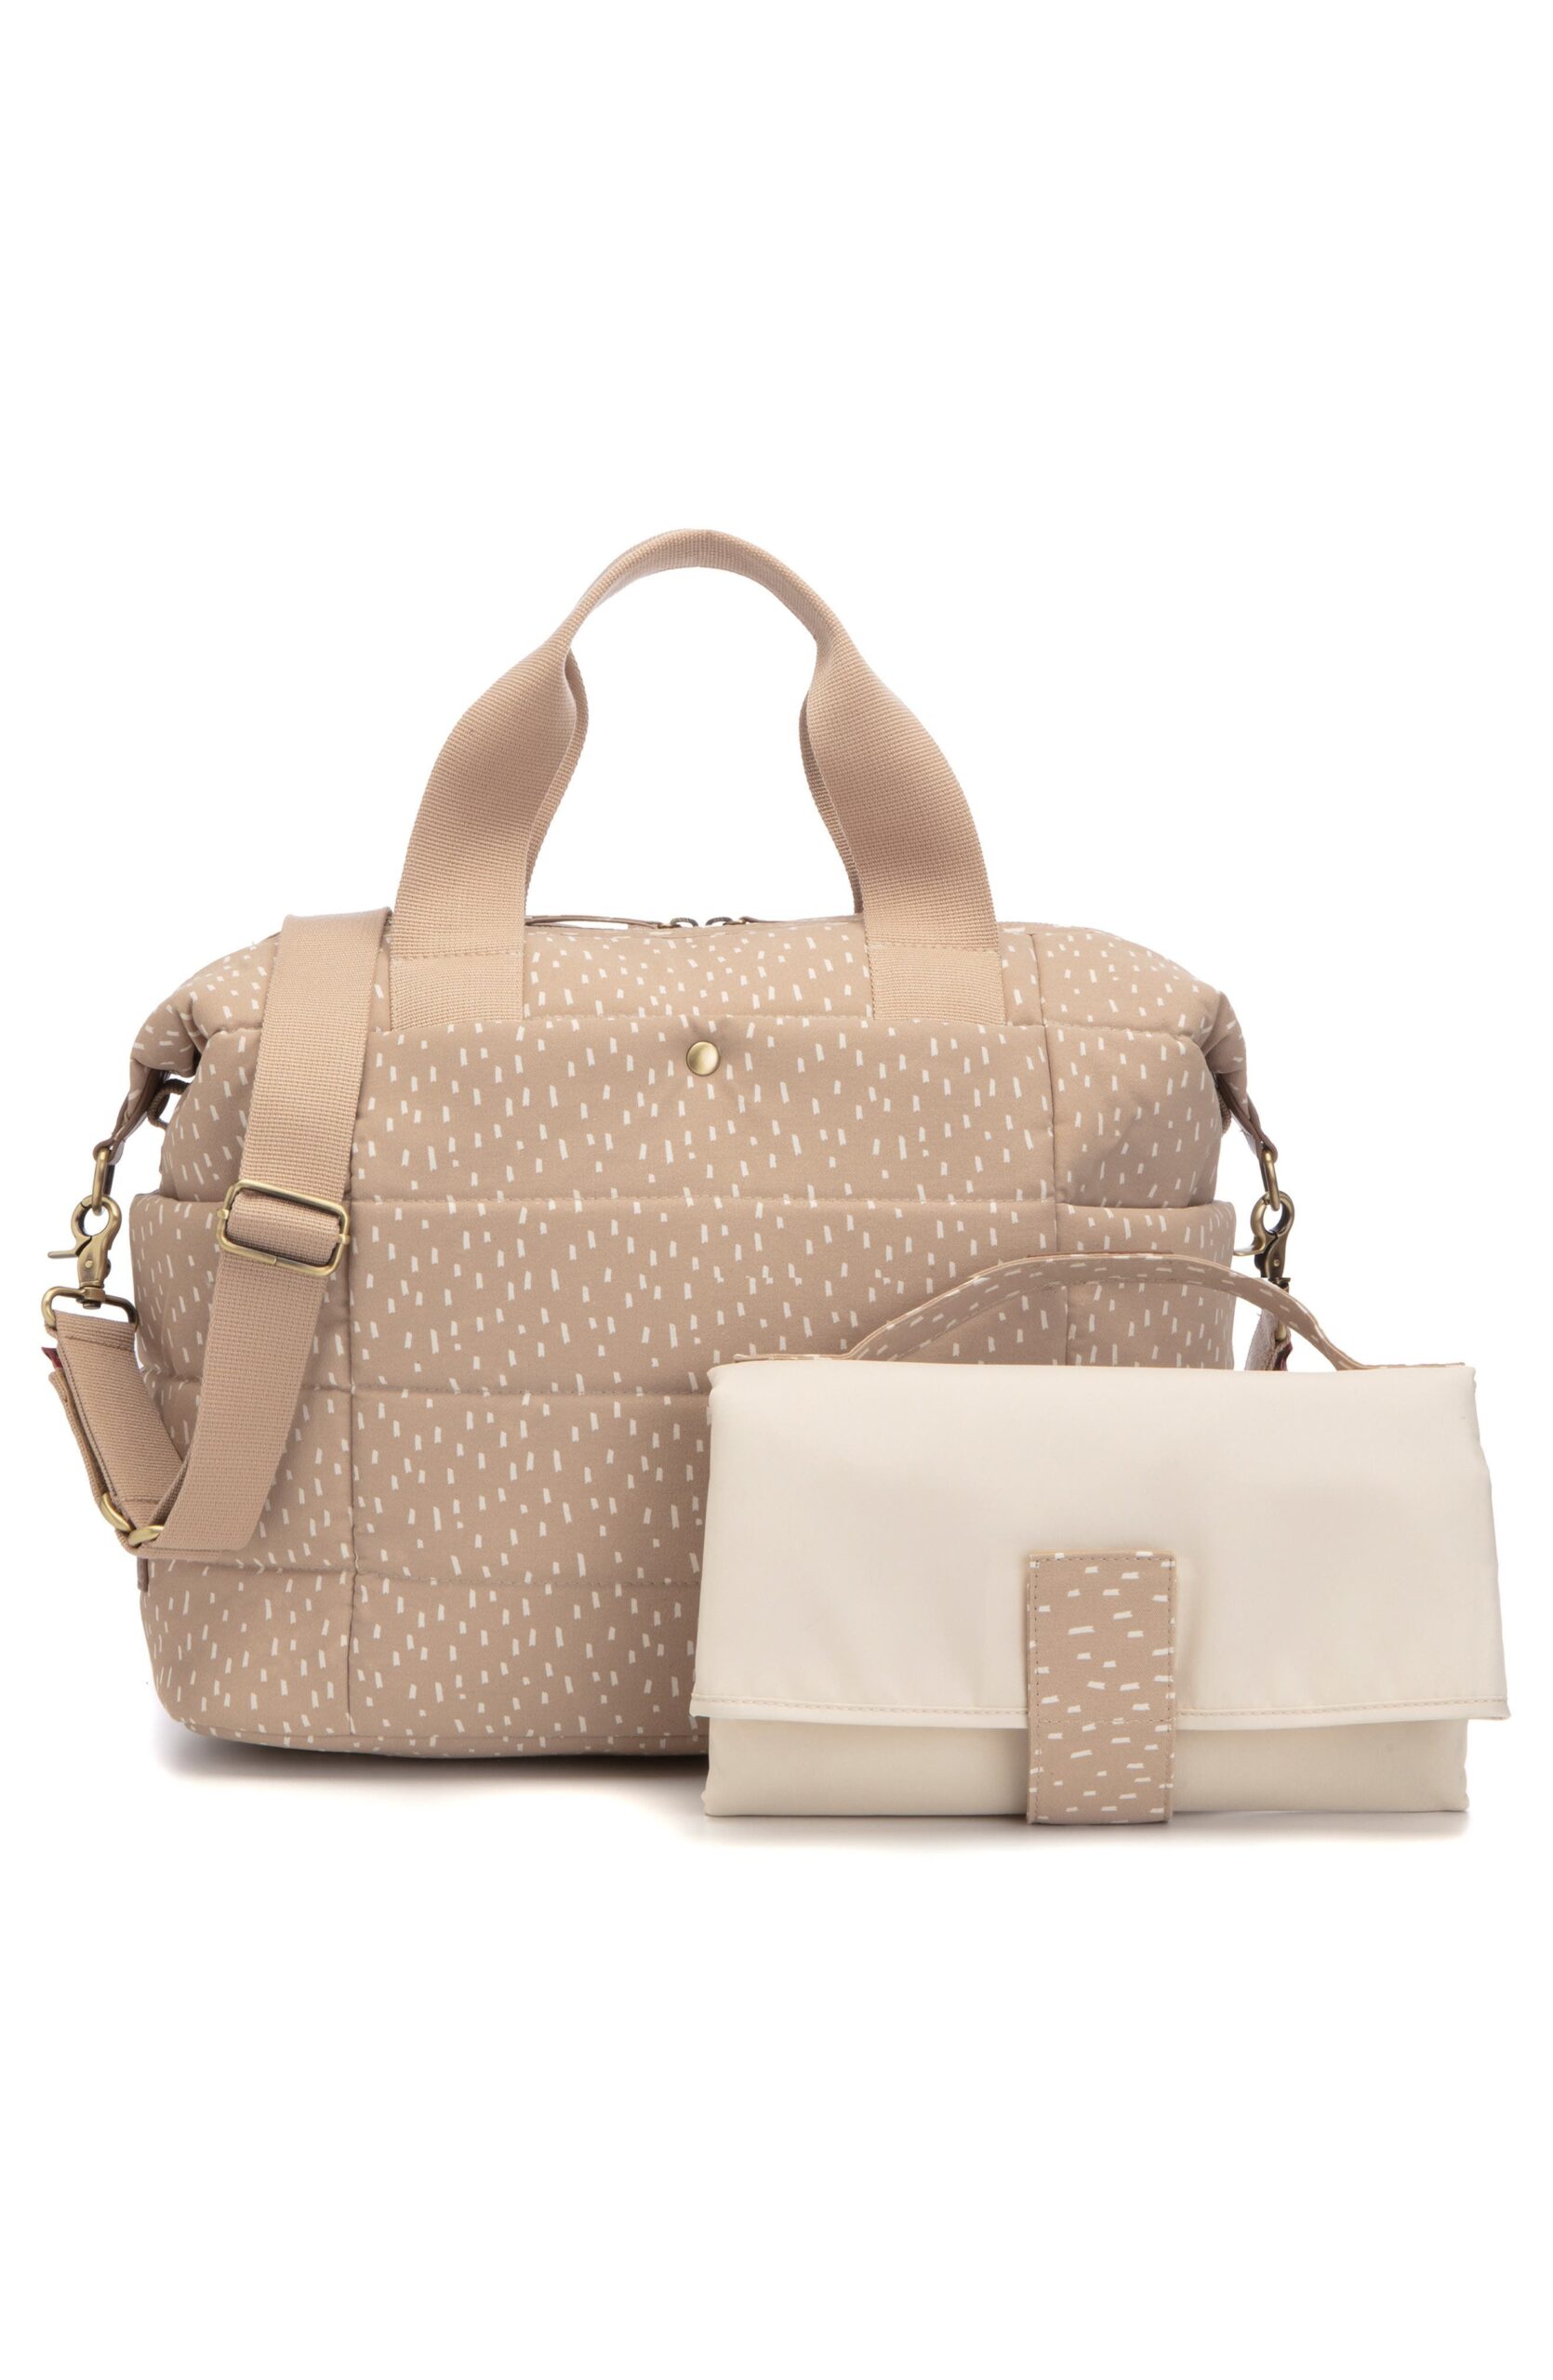 On-the-Go Essentials: Finding the Best Diaper Bags for Busy Parents